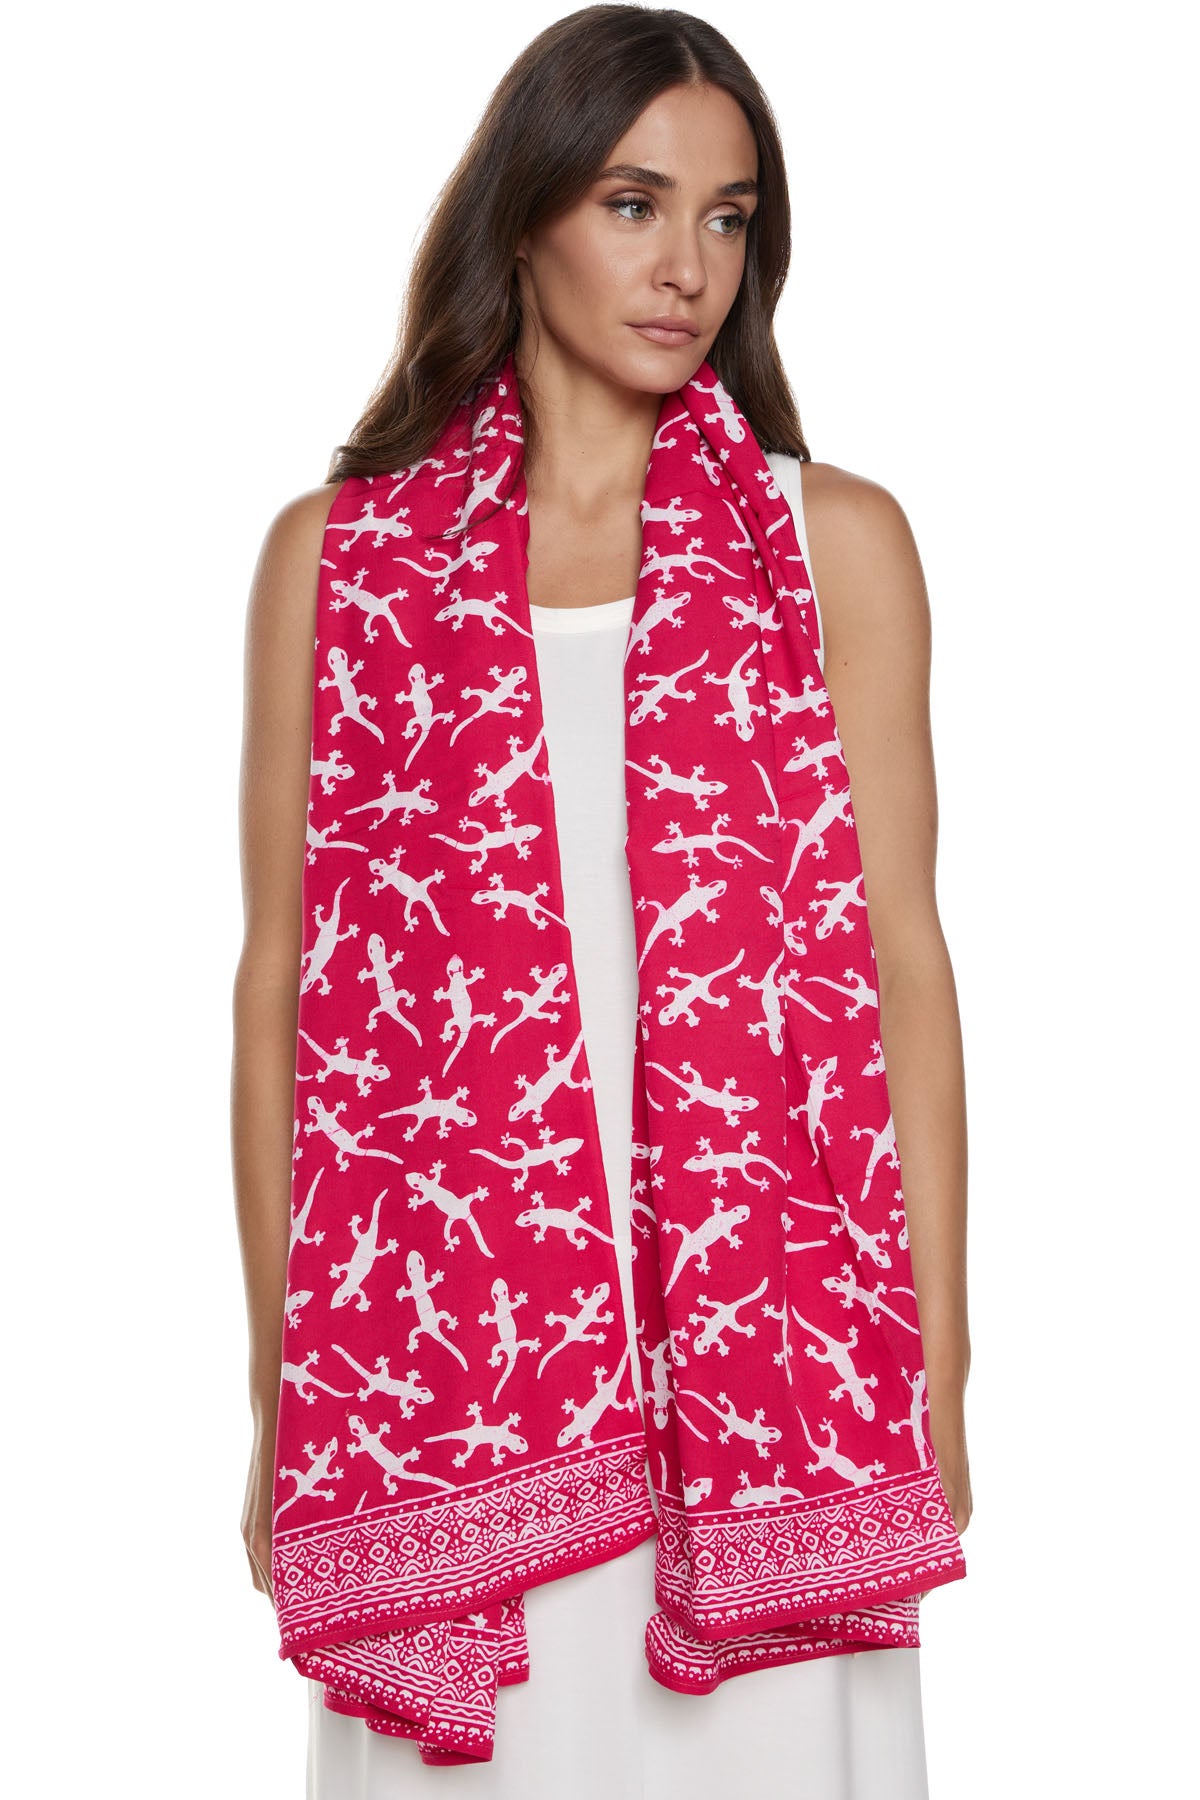 Chic & Simple Pareo / Scarf Vivian - Red with White Salamanders